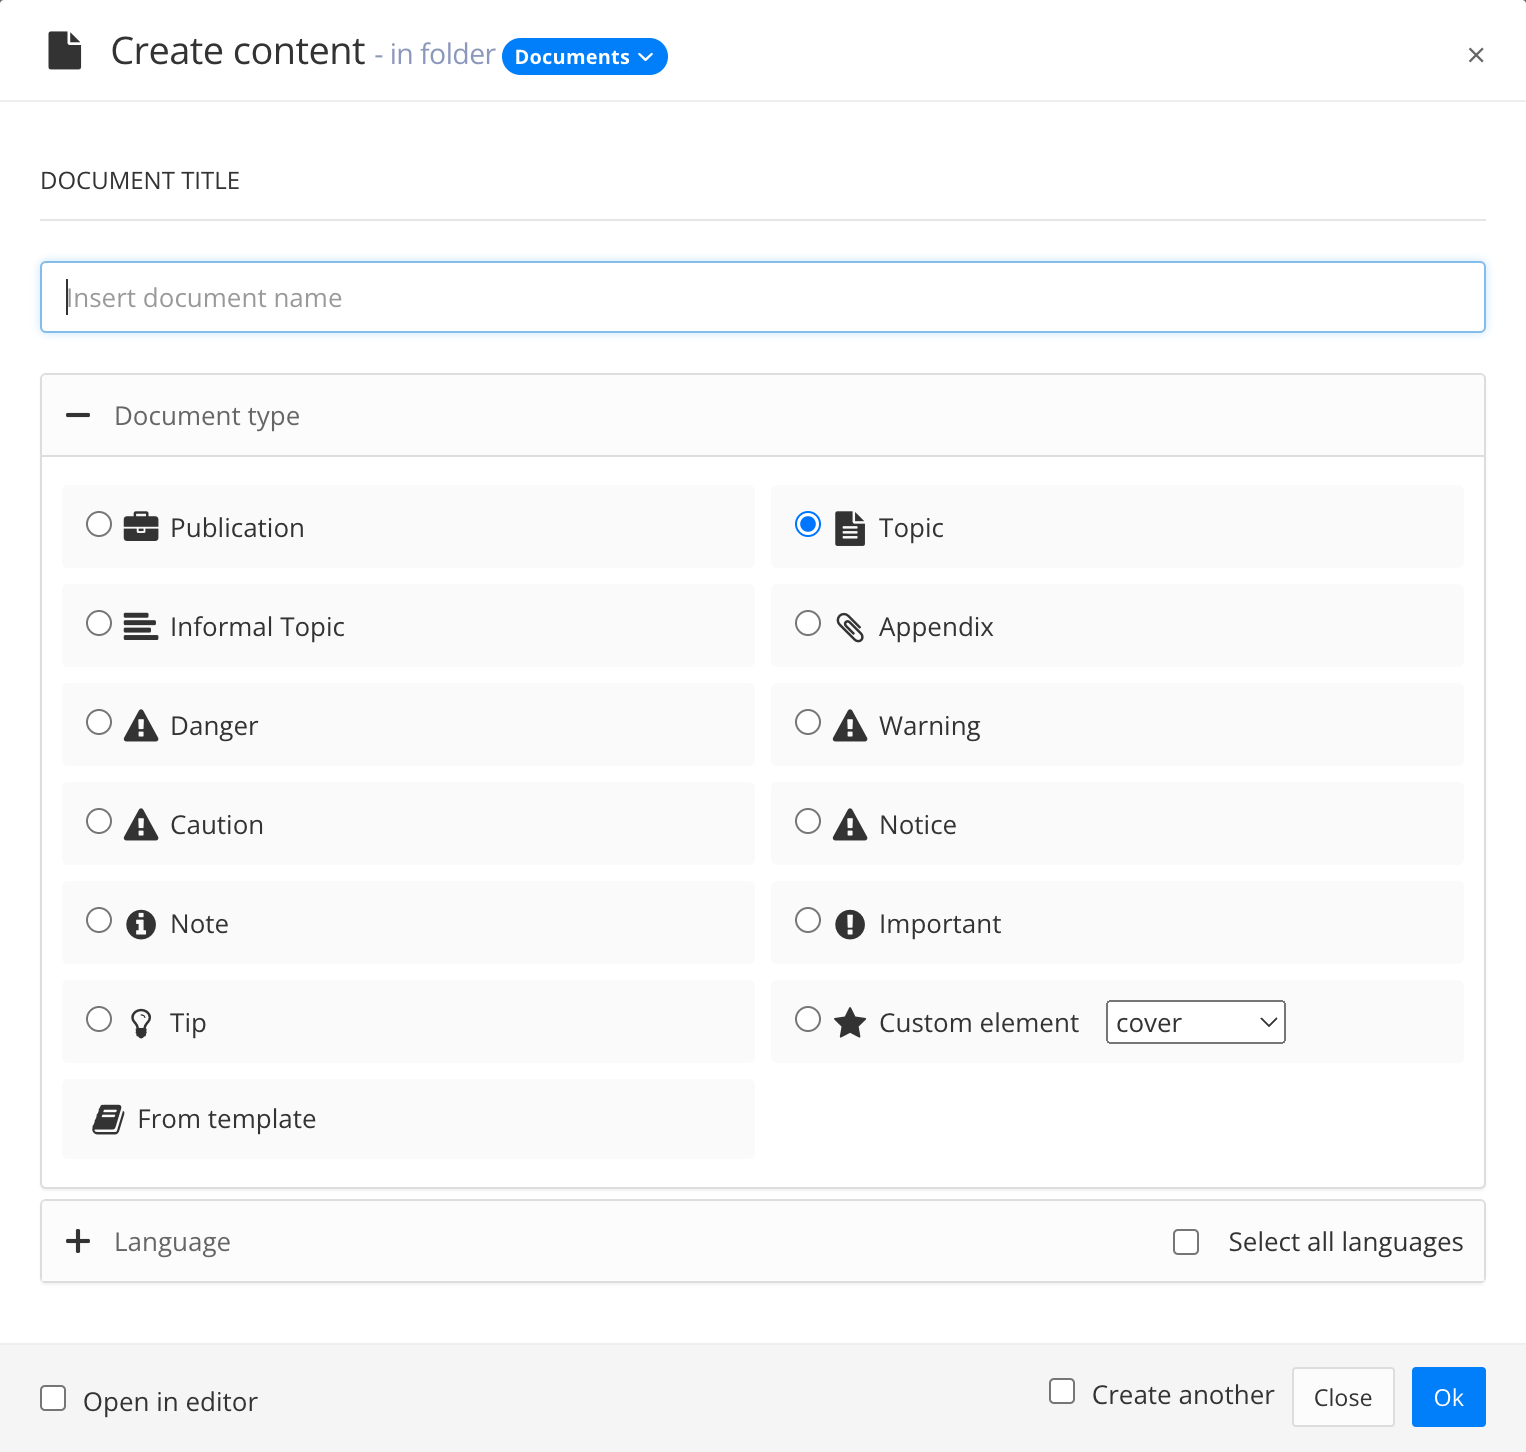 Create content dialog. It has a field for entering a title, various options for selecting the type of content, a language selector, and options for selecting all languages, opening in the editor, and creating another component.